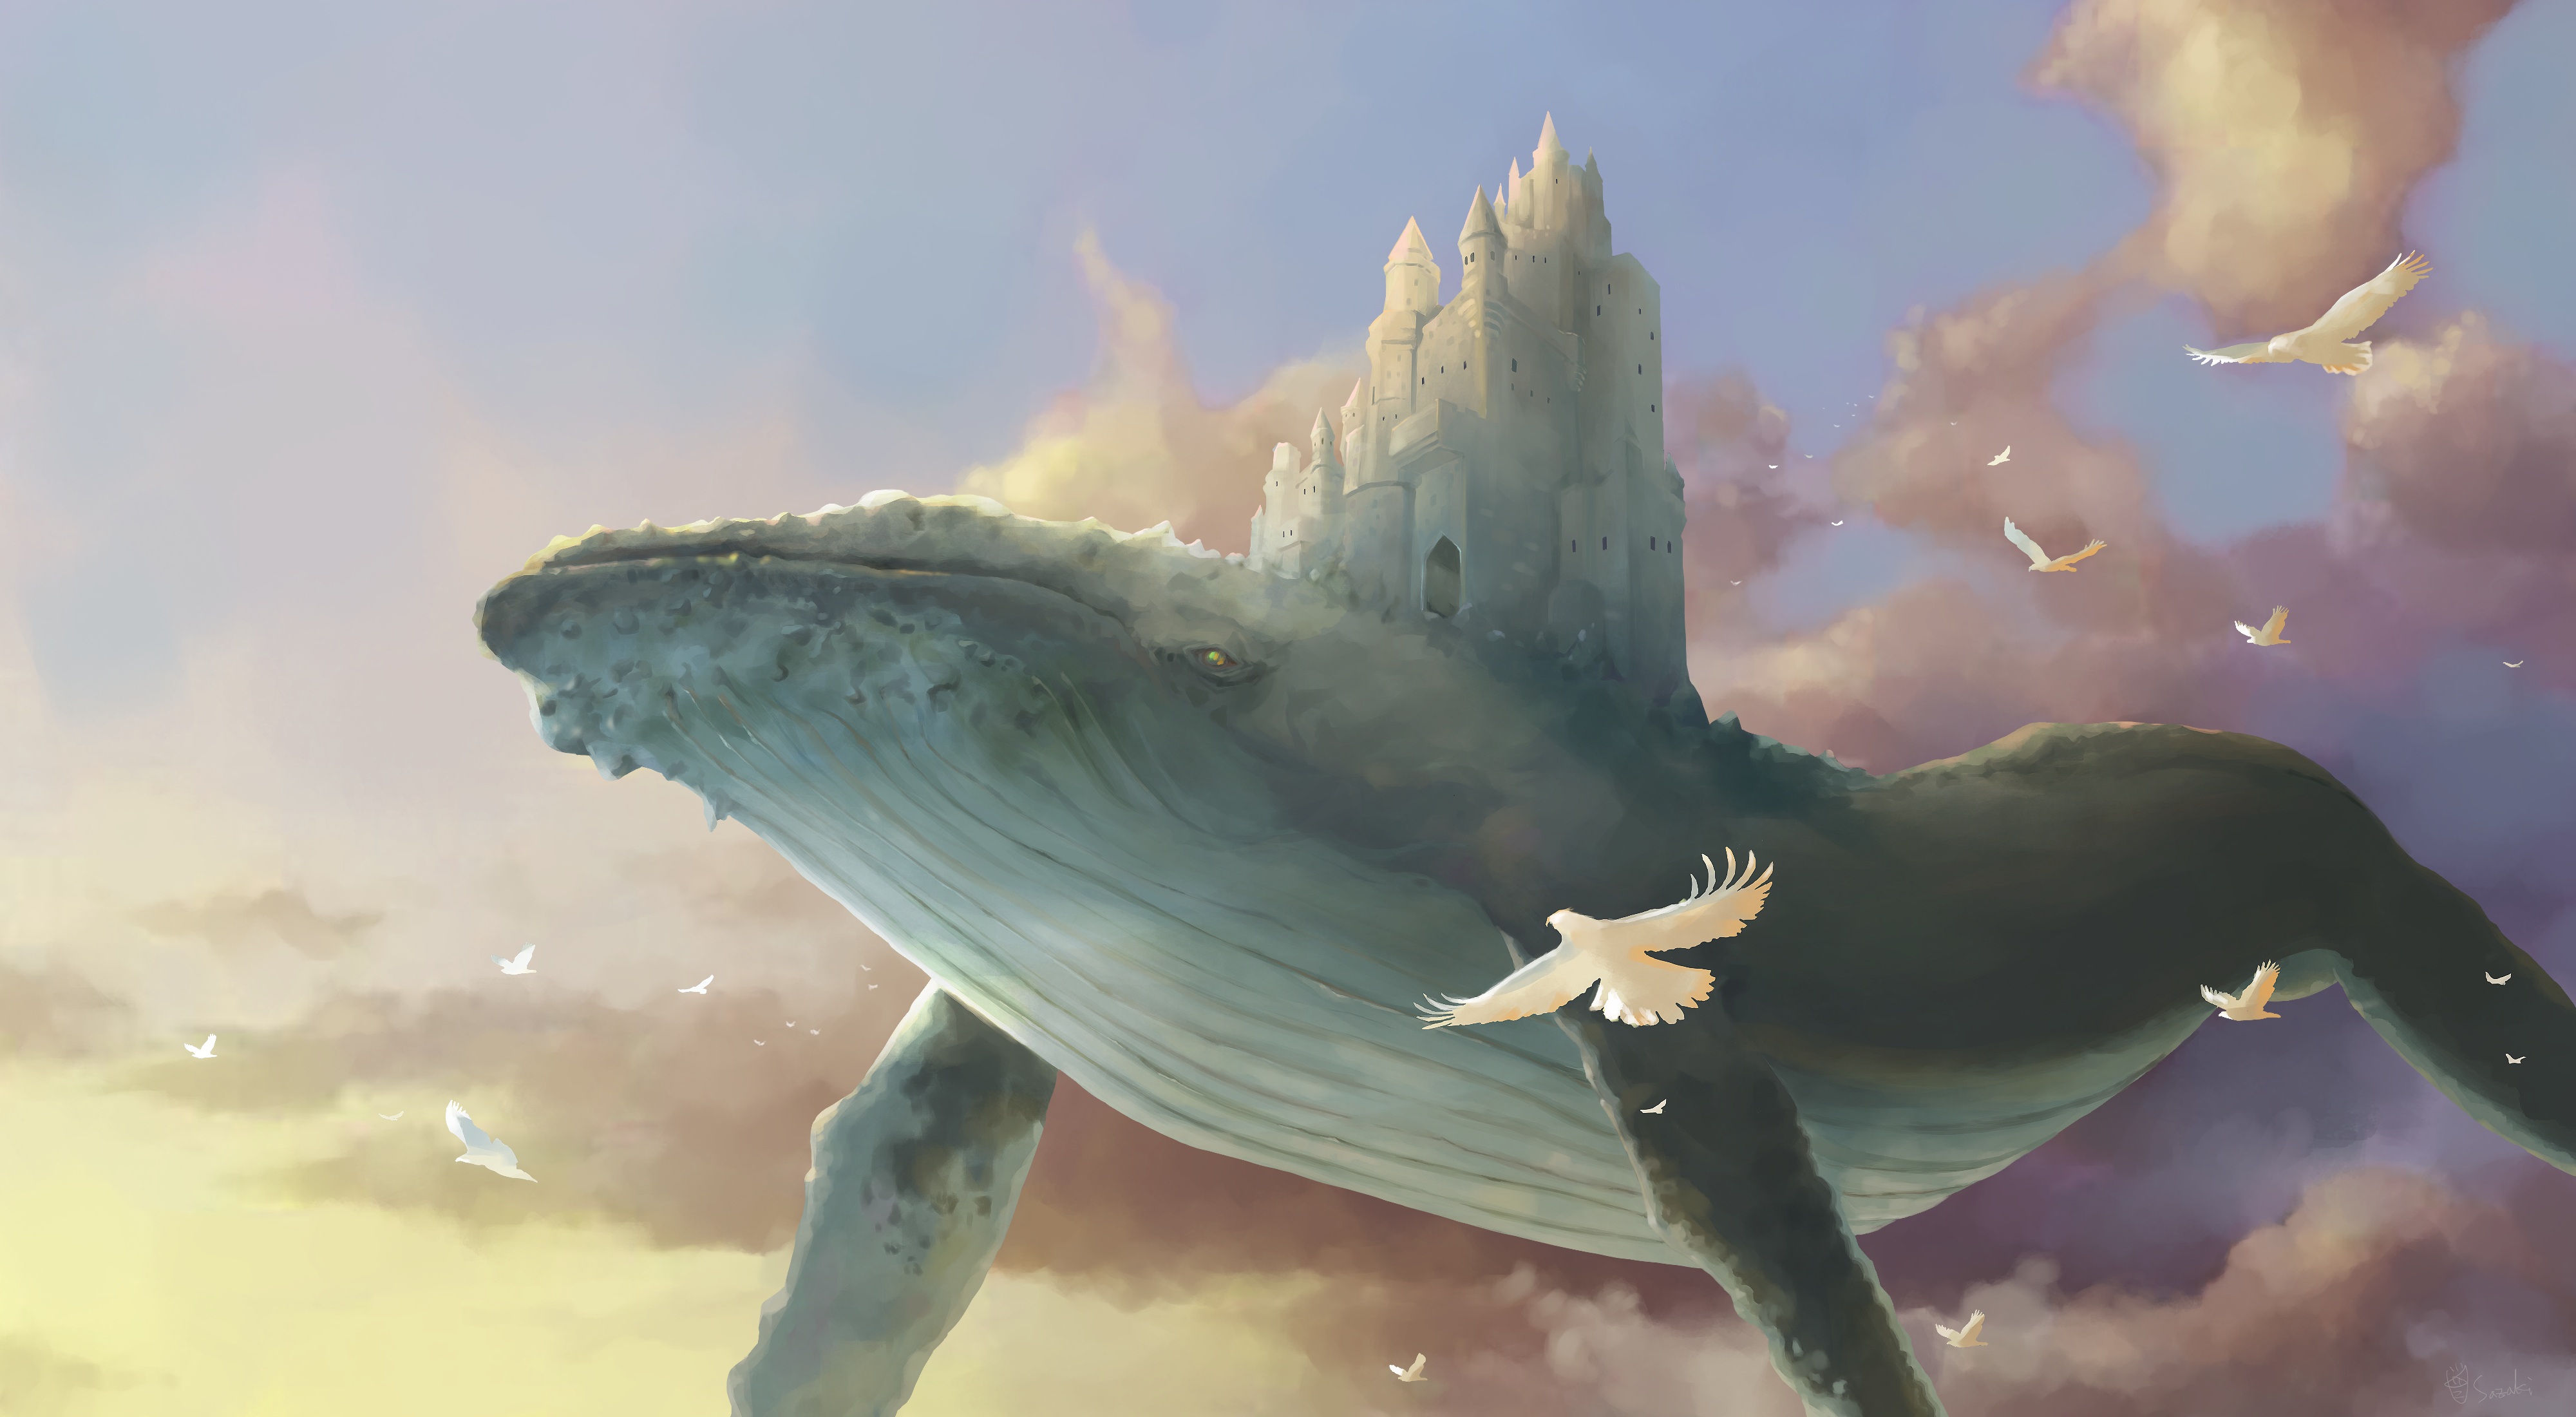 Whale by 月光蟲